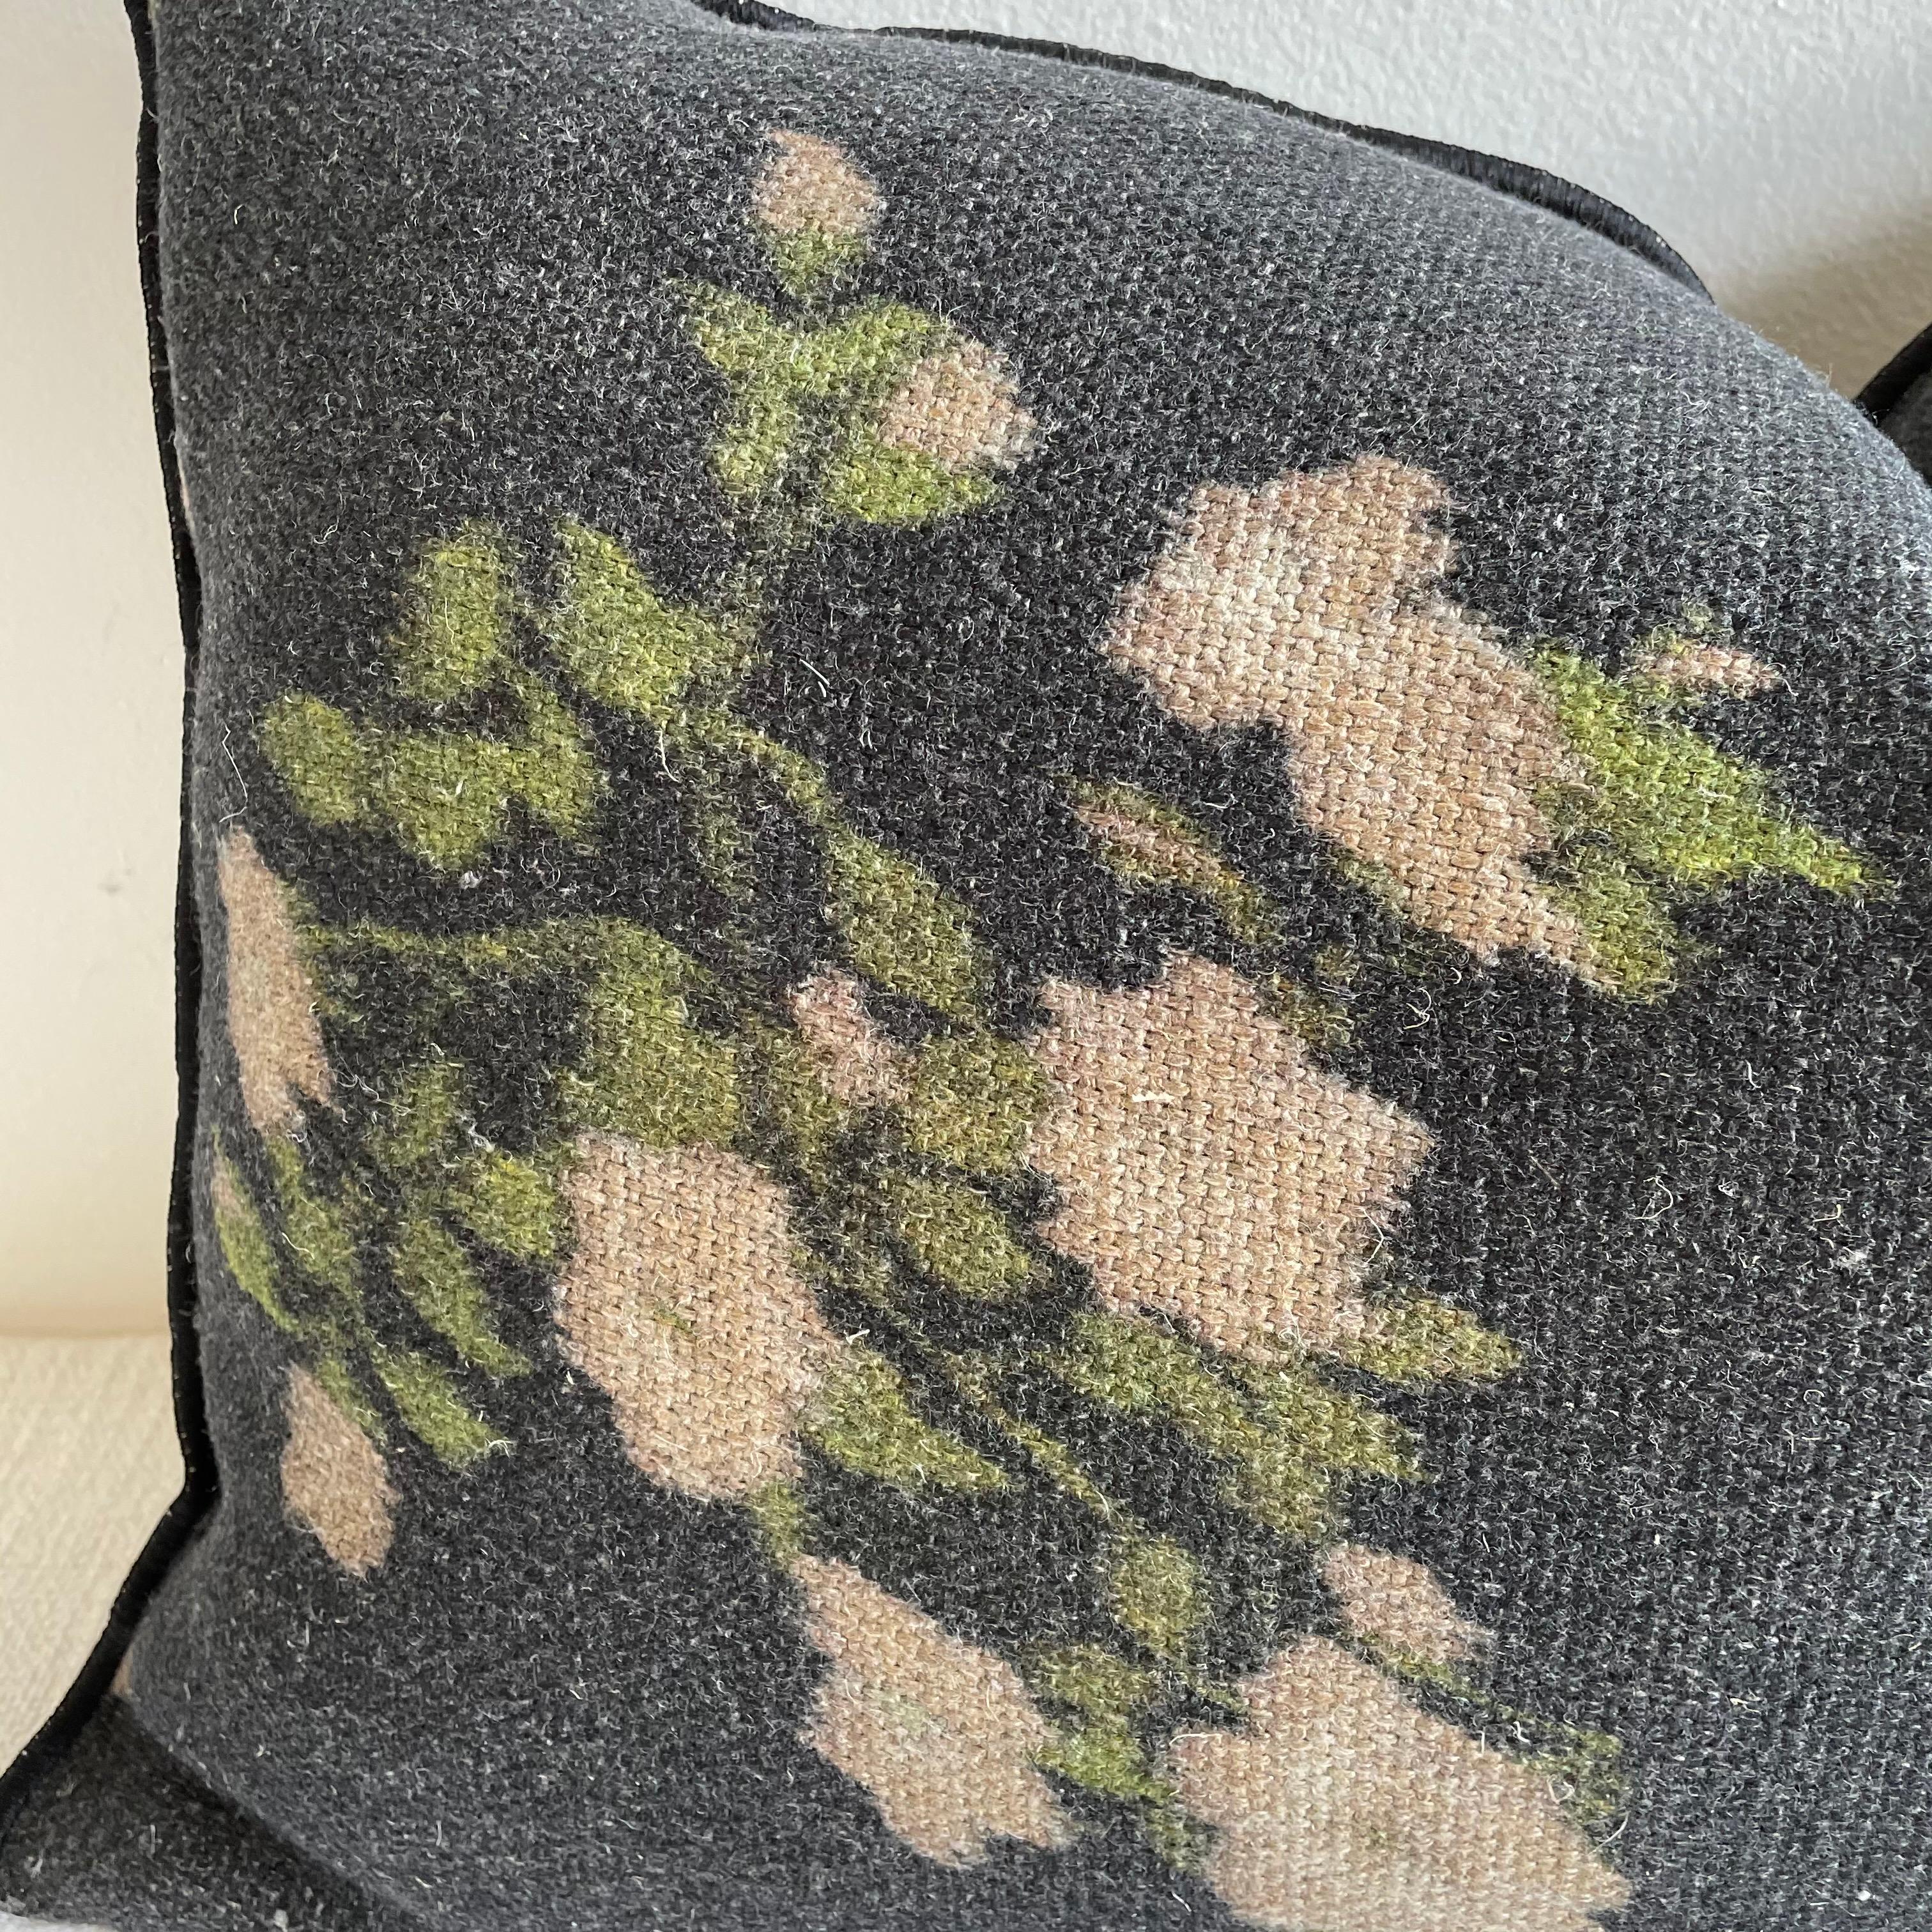 Custom linen blend accent pillow. Color: Crème a beige floral or black colored nubby textured style pillow with a stitched edge, metal zipper closure. Our pillows are constructed with vintage one of a kind textiles from around the globe. Includes a